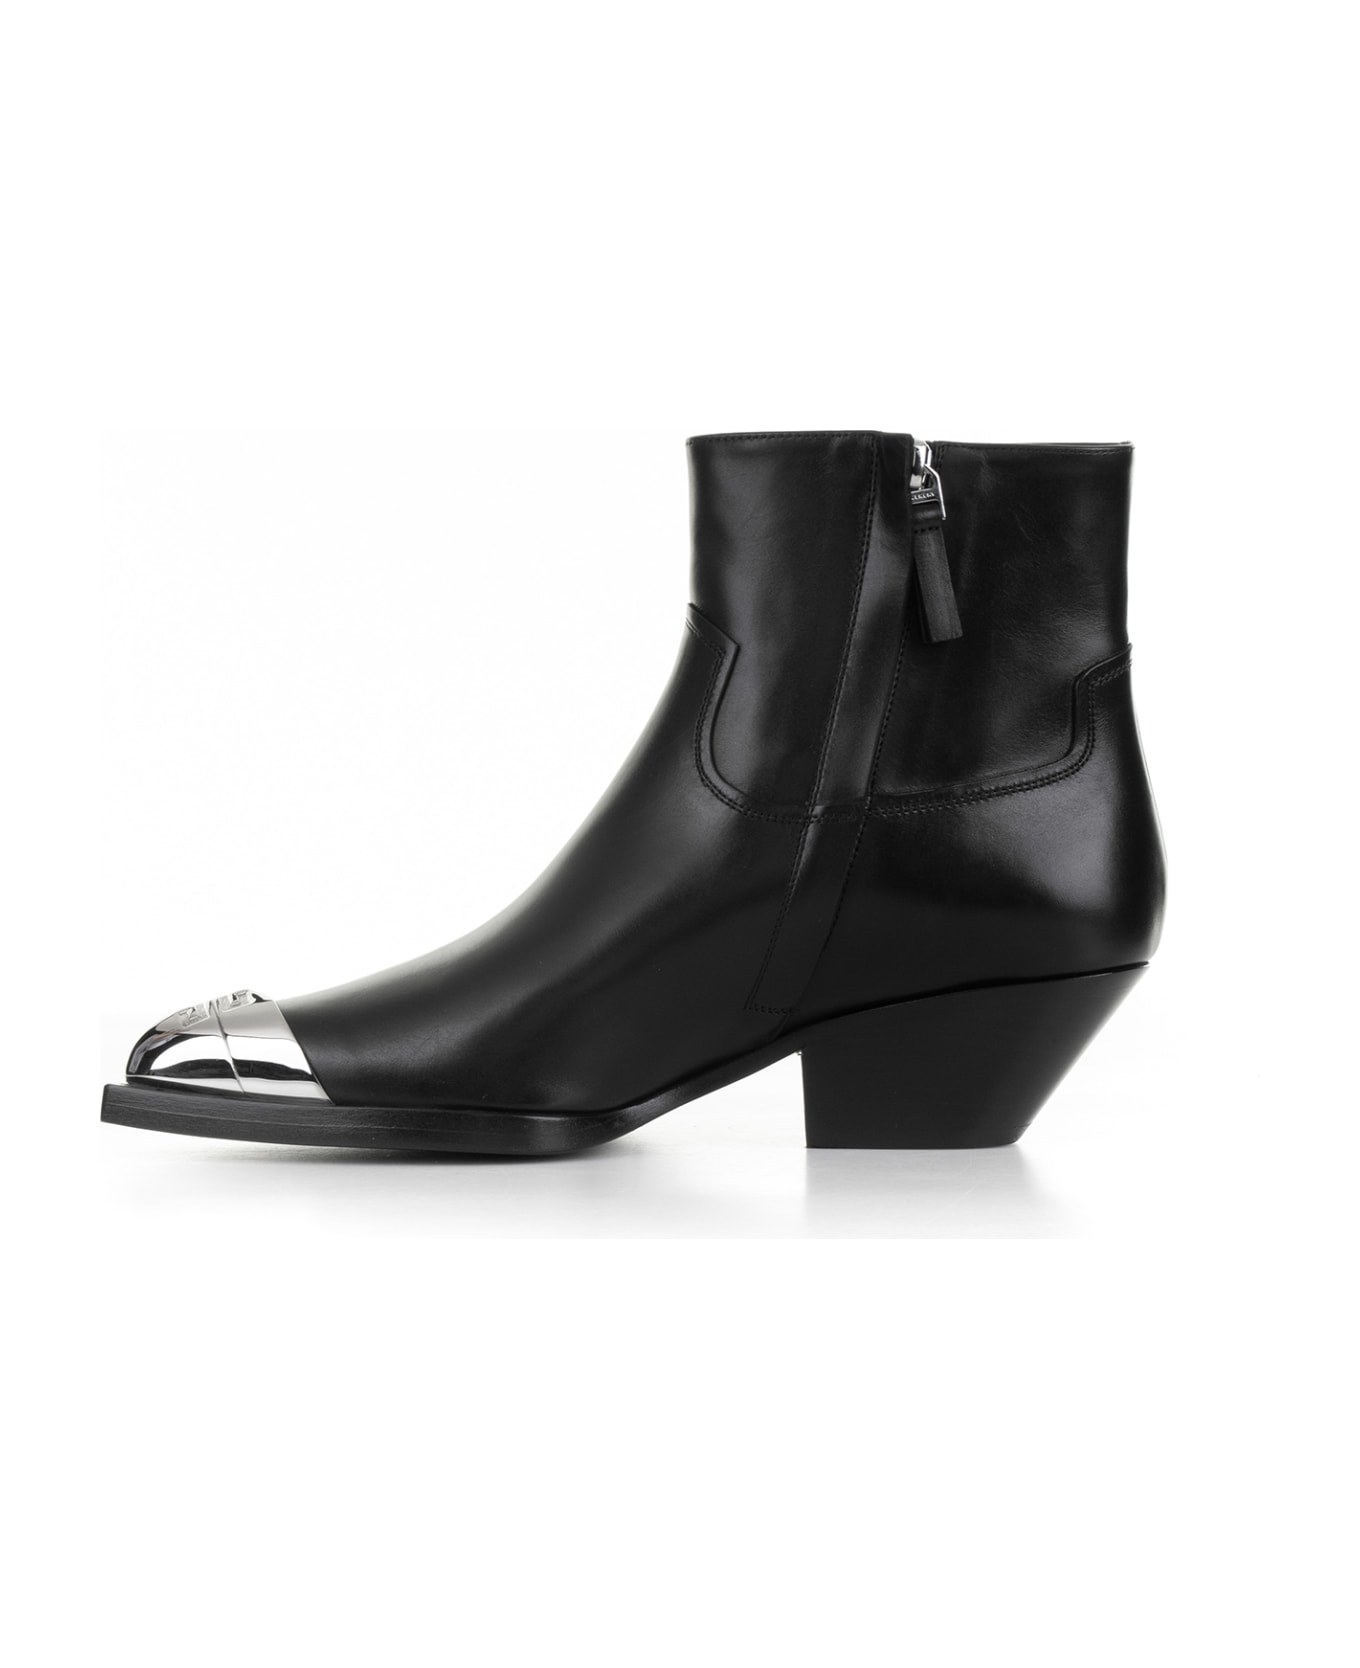 Givenchy Ankle Boots - NERO